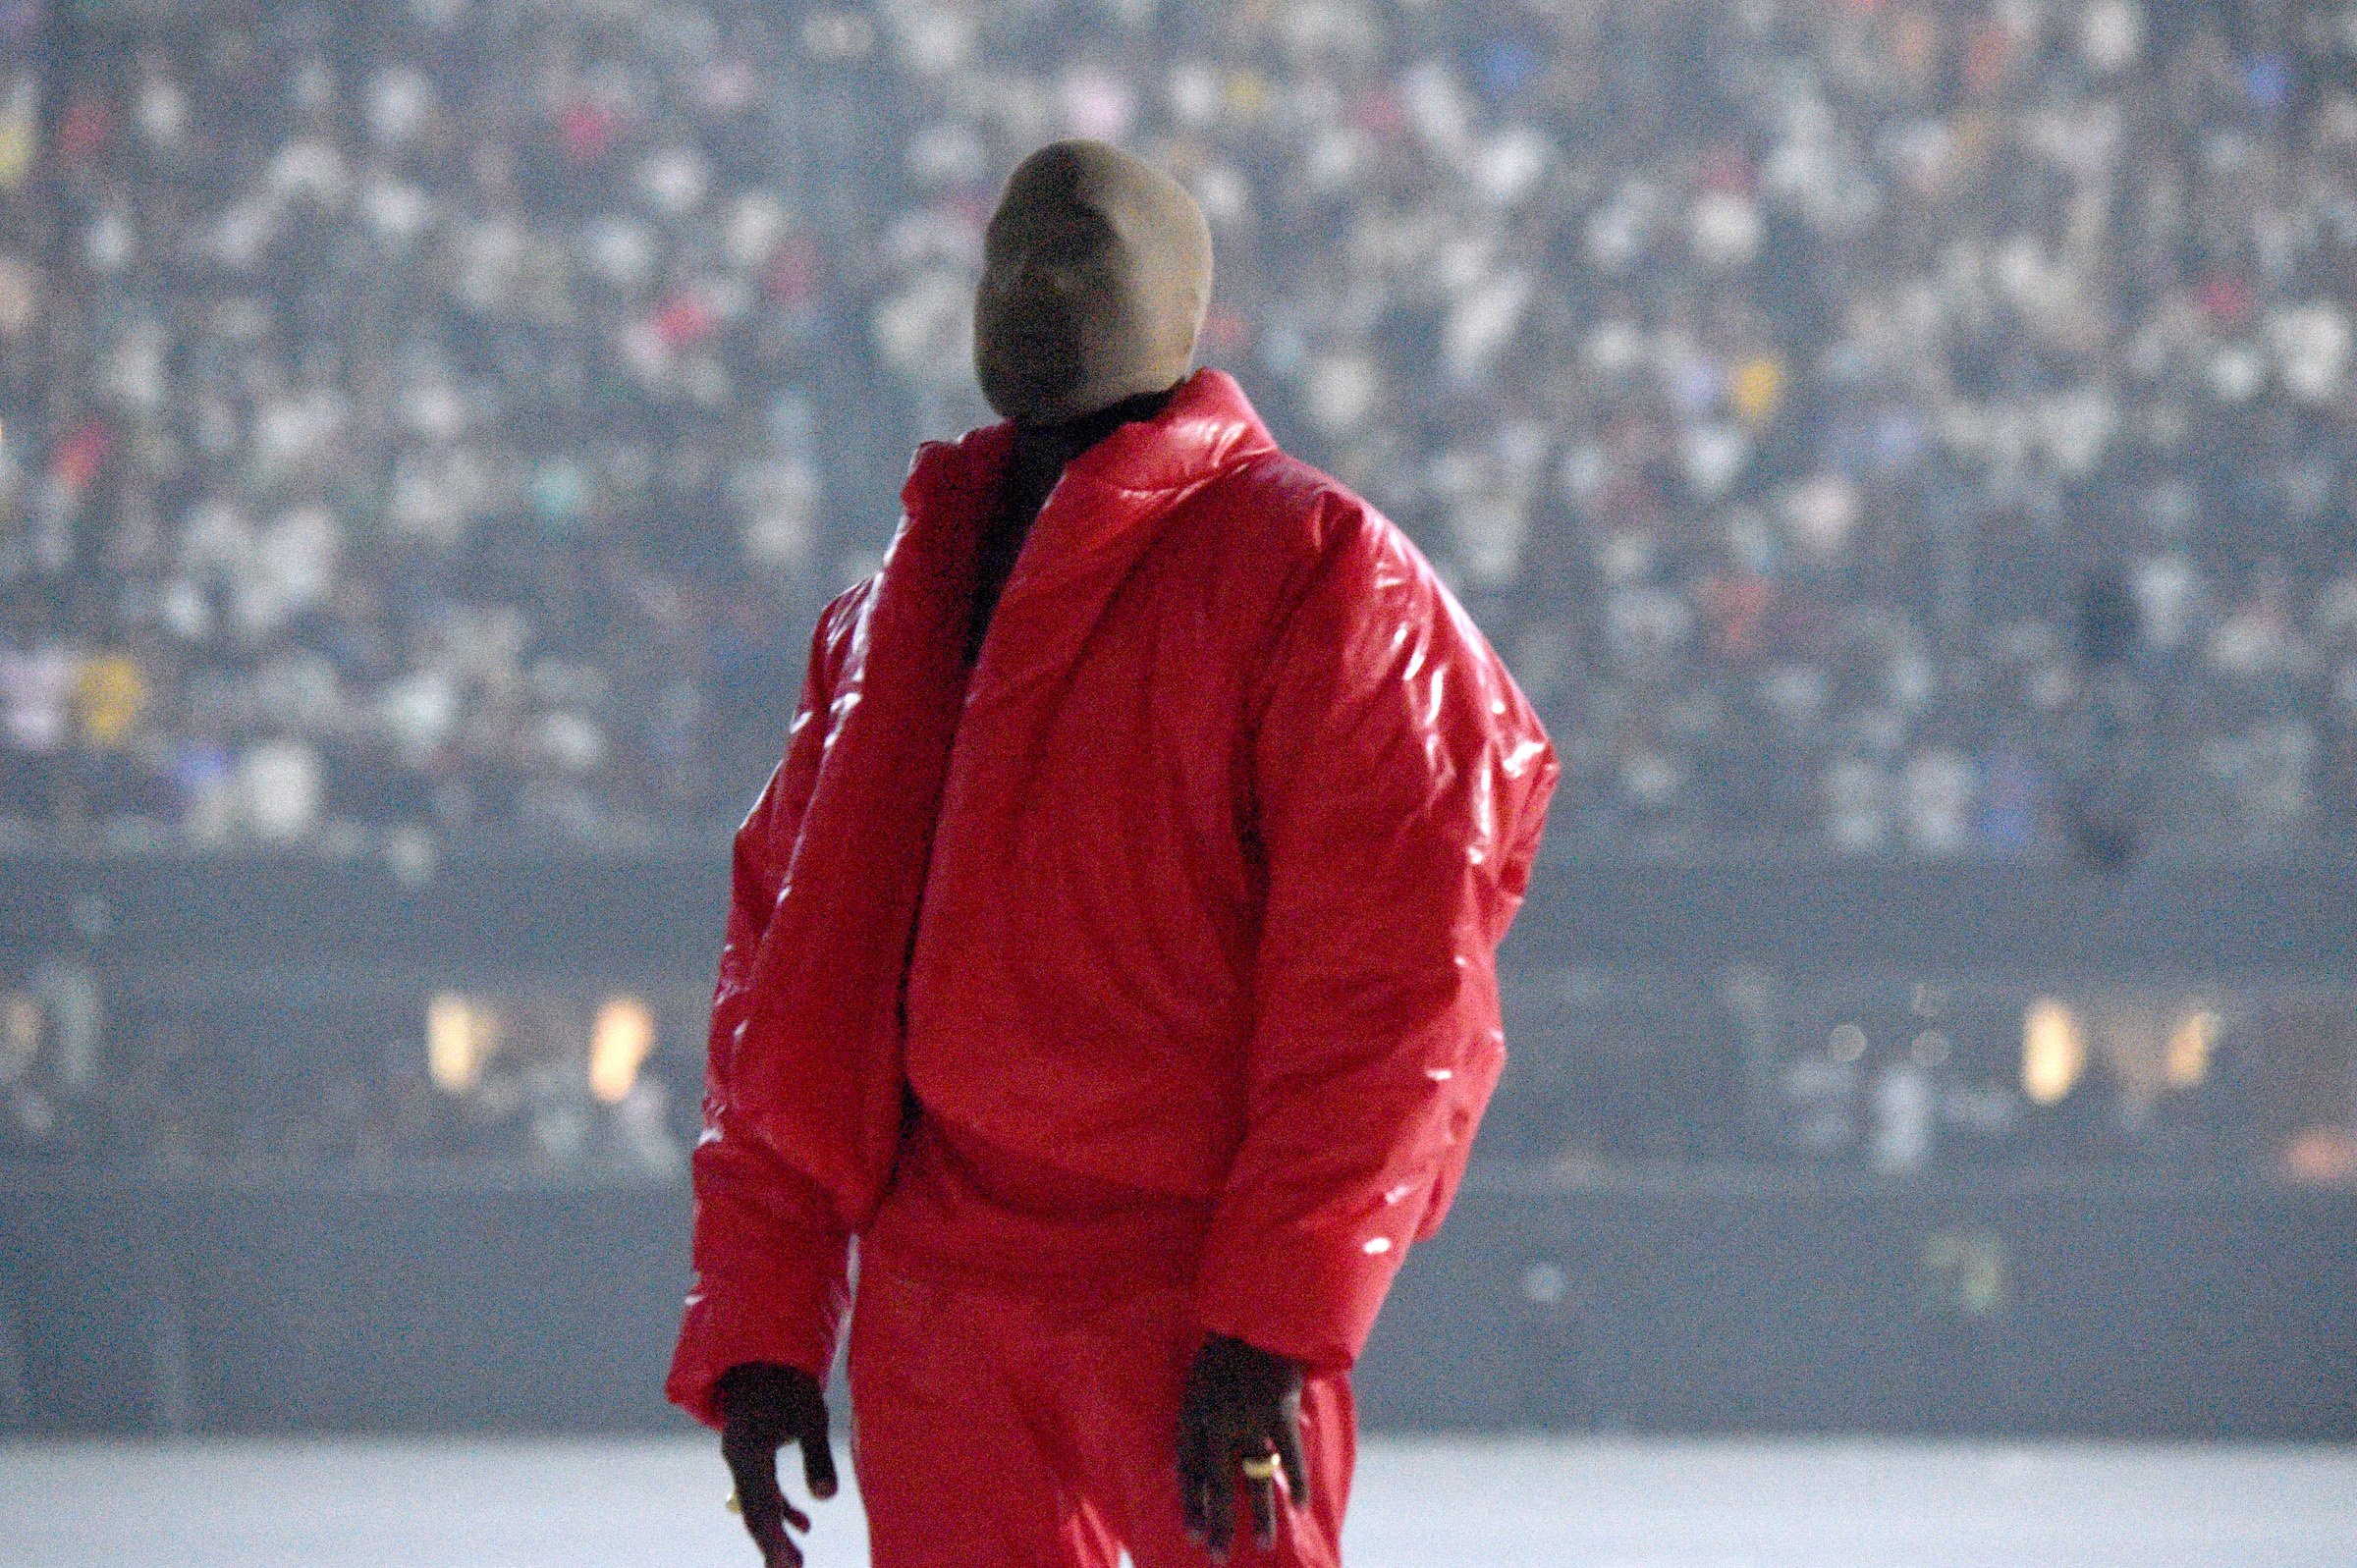 Kanye West wearing red and a face covering